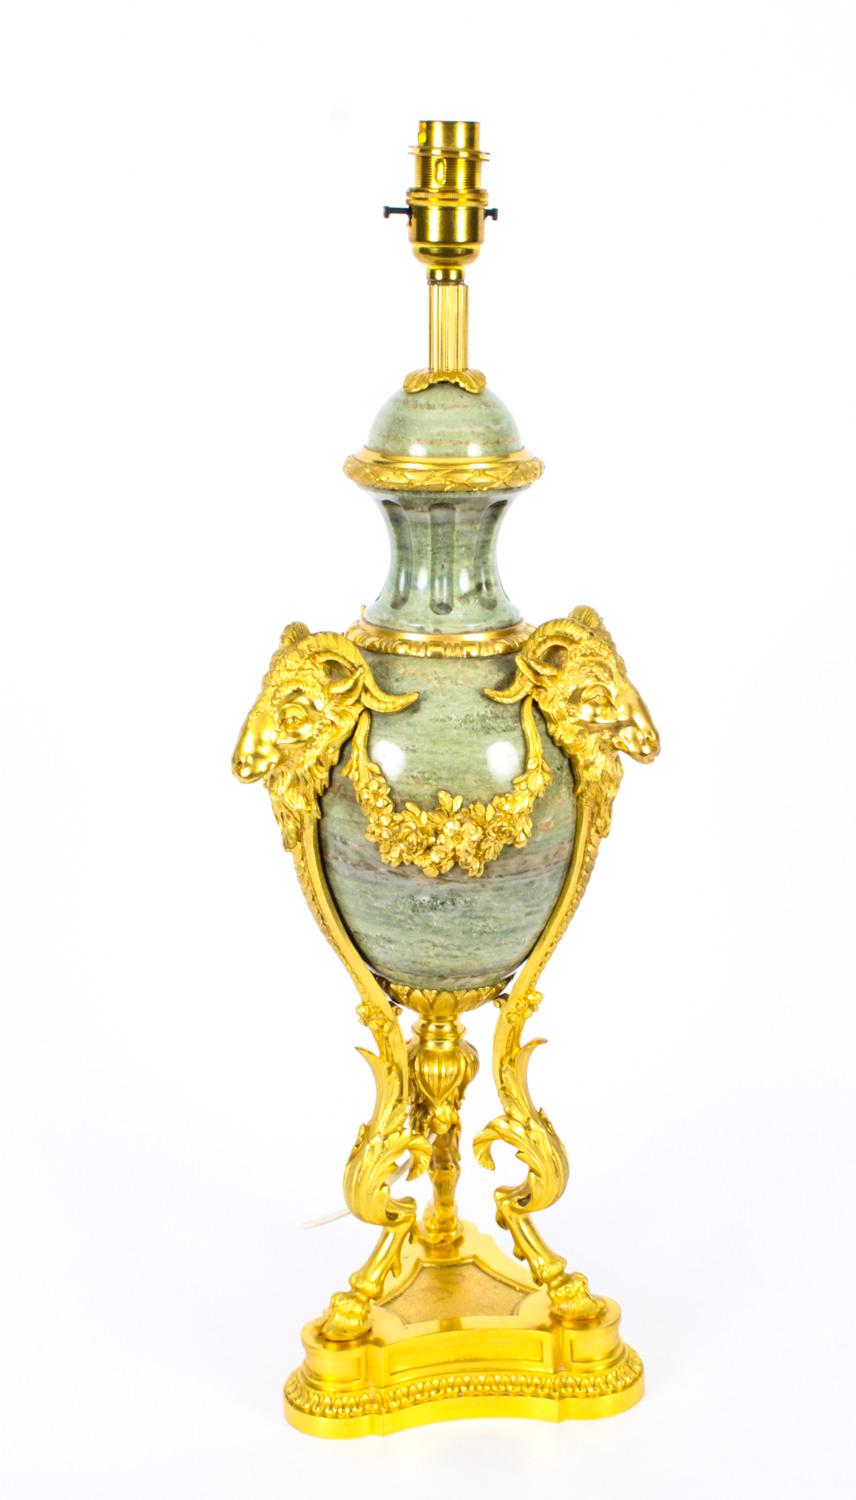 A beautiful French lime marble and ormolu mounted table lamp, C1880 in date.

This beautiful ormolu mounted mable table lamp is decorated with superb ormolu floral garlands with rams head mounts on tripod acathus legs with hoof feet with a